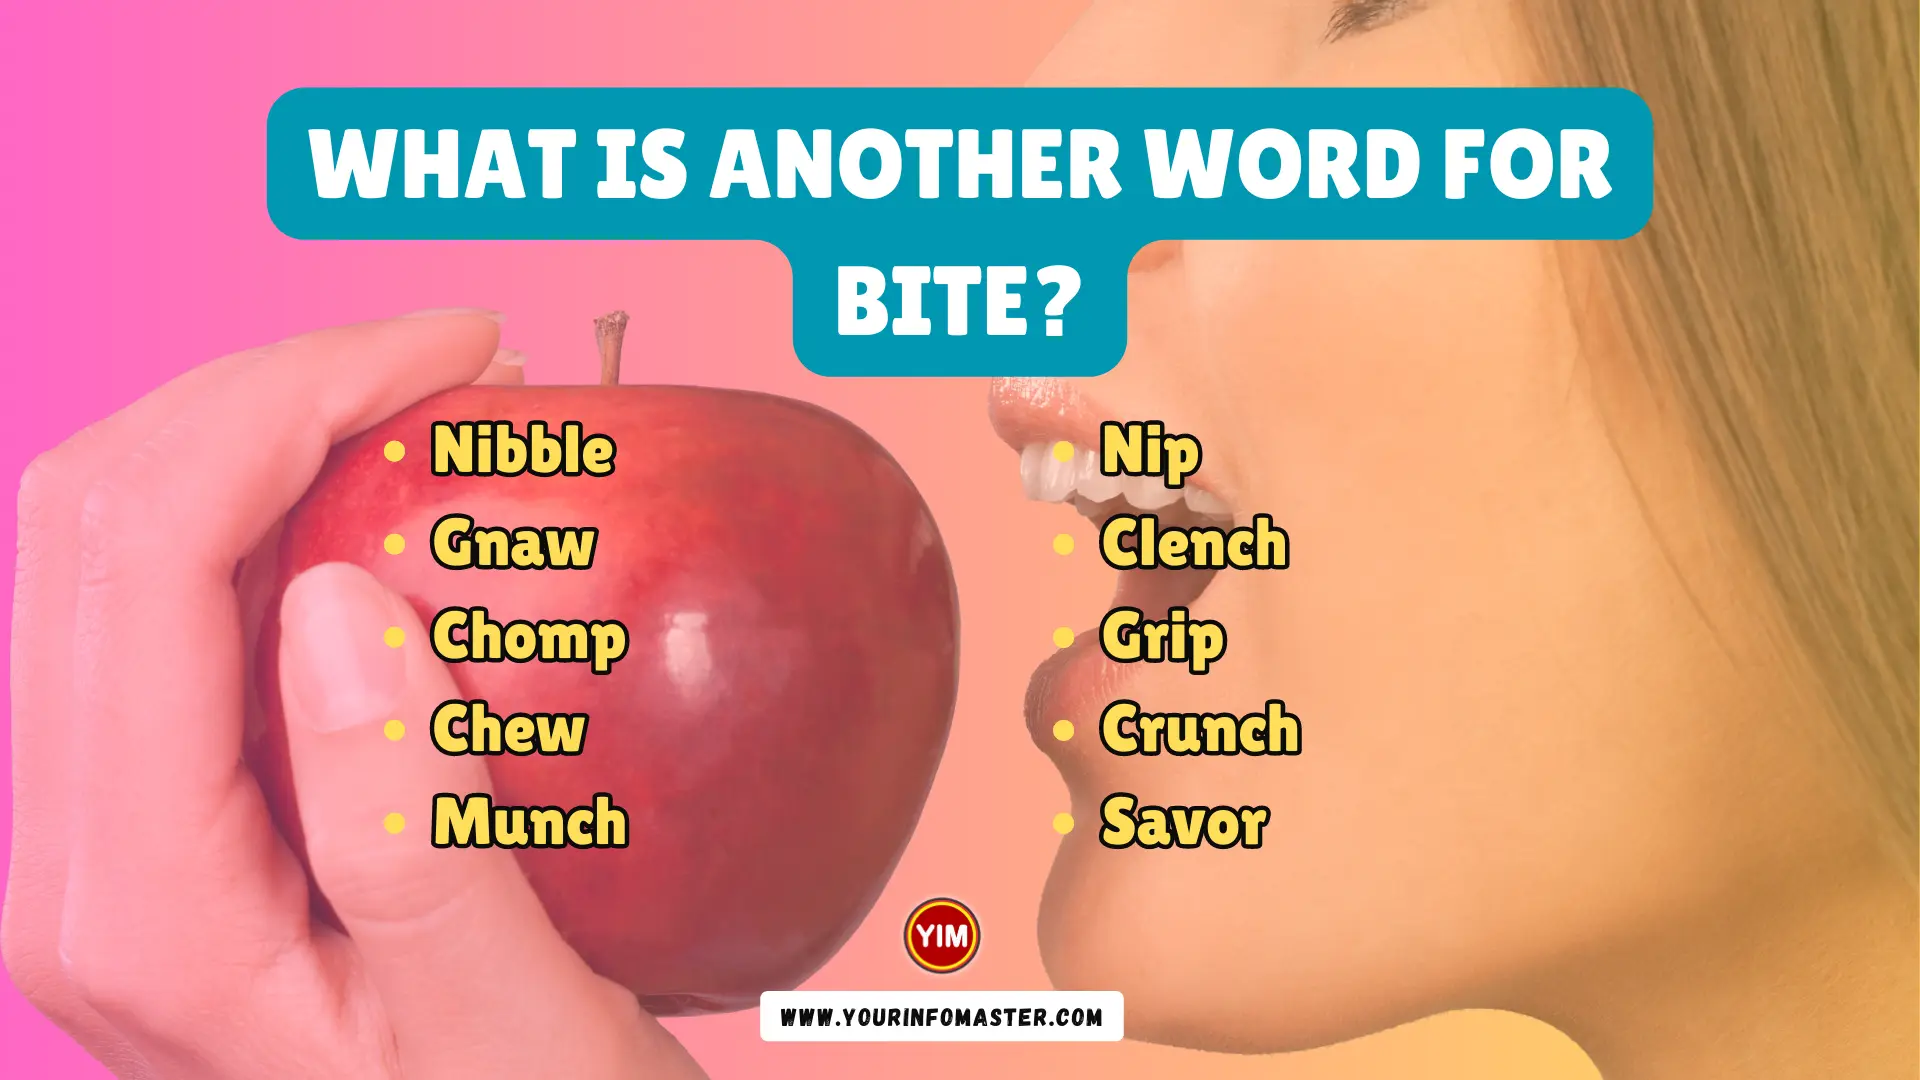 What is another word for Bite